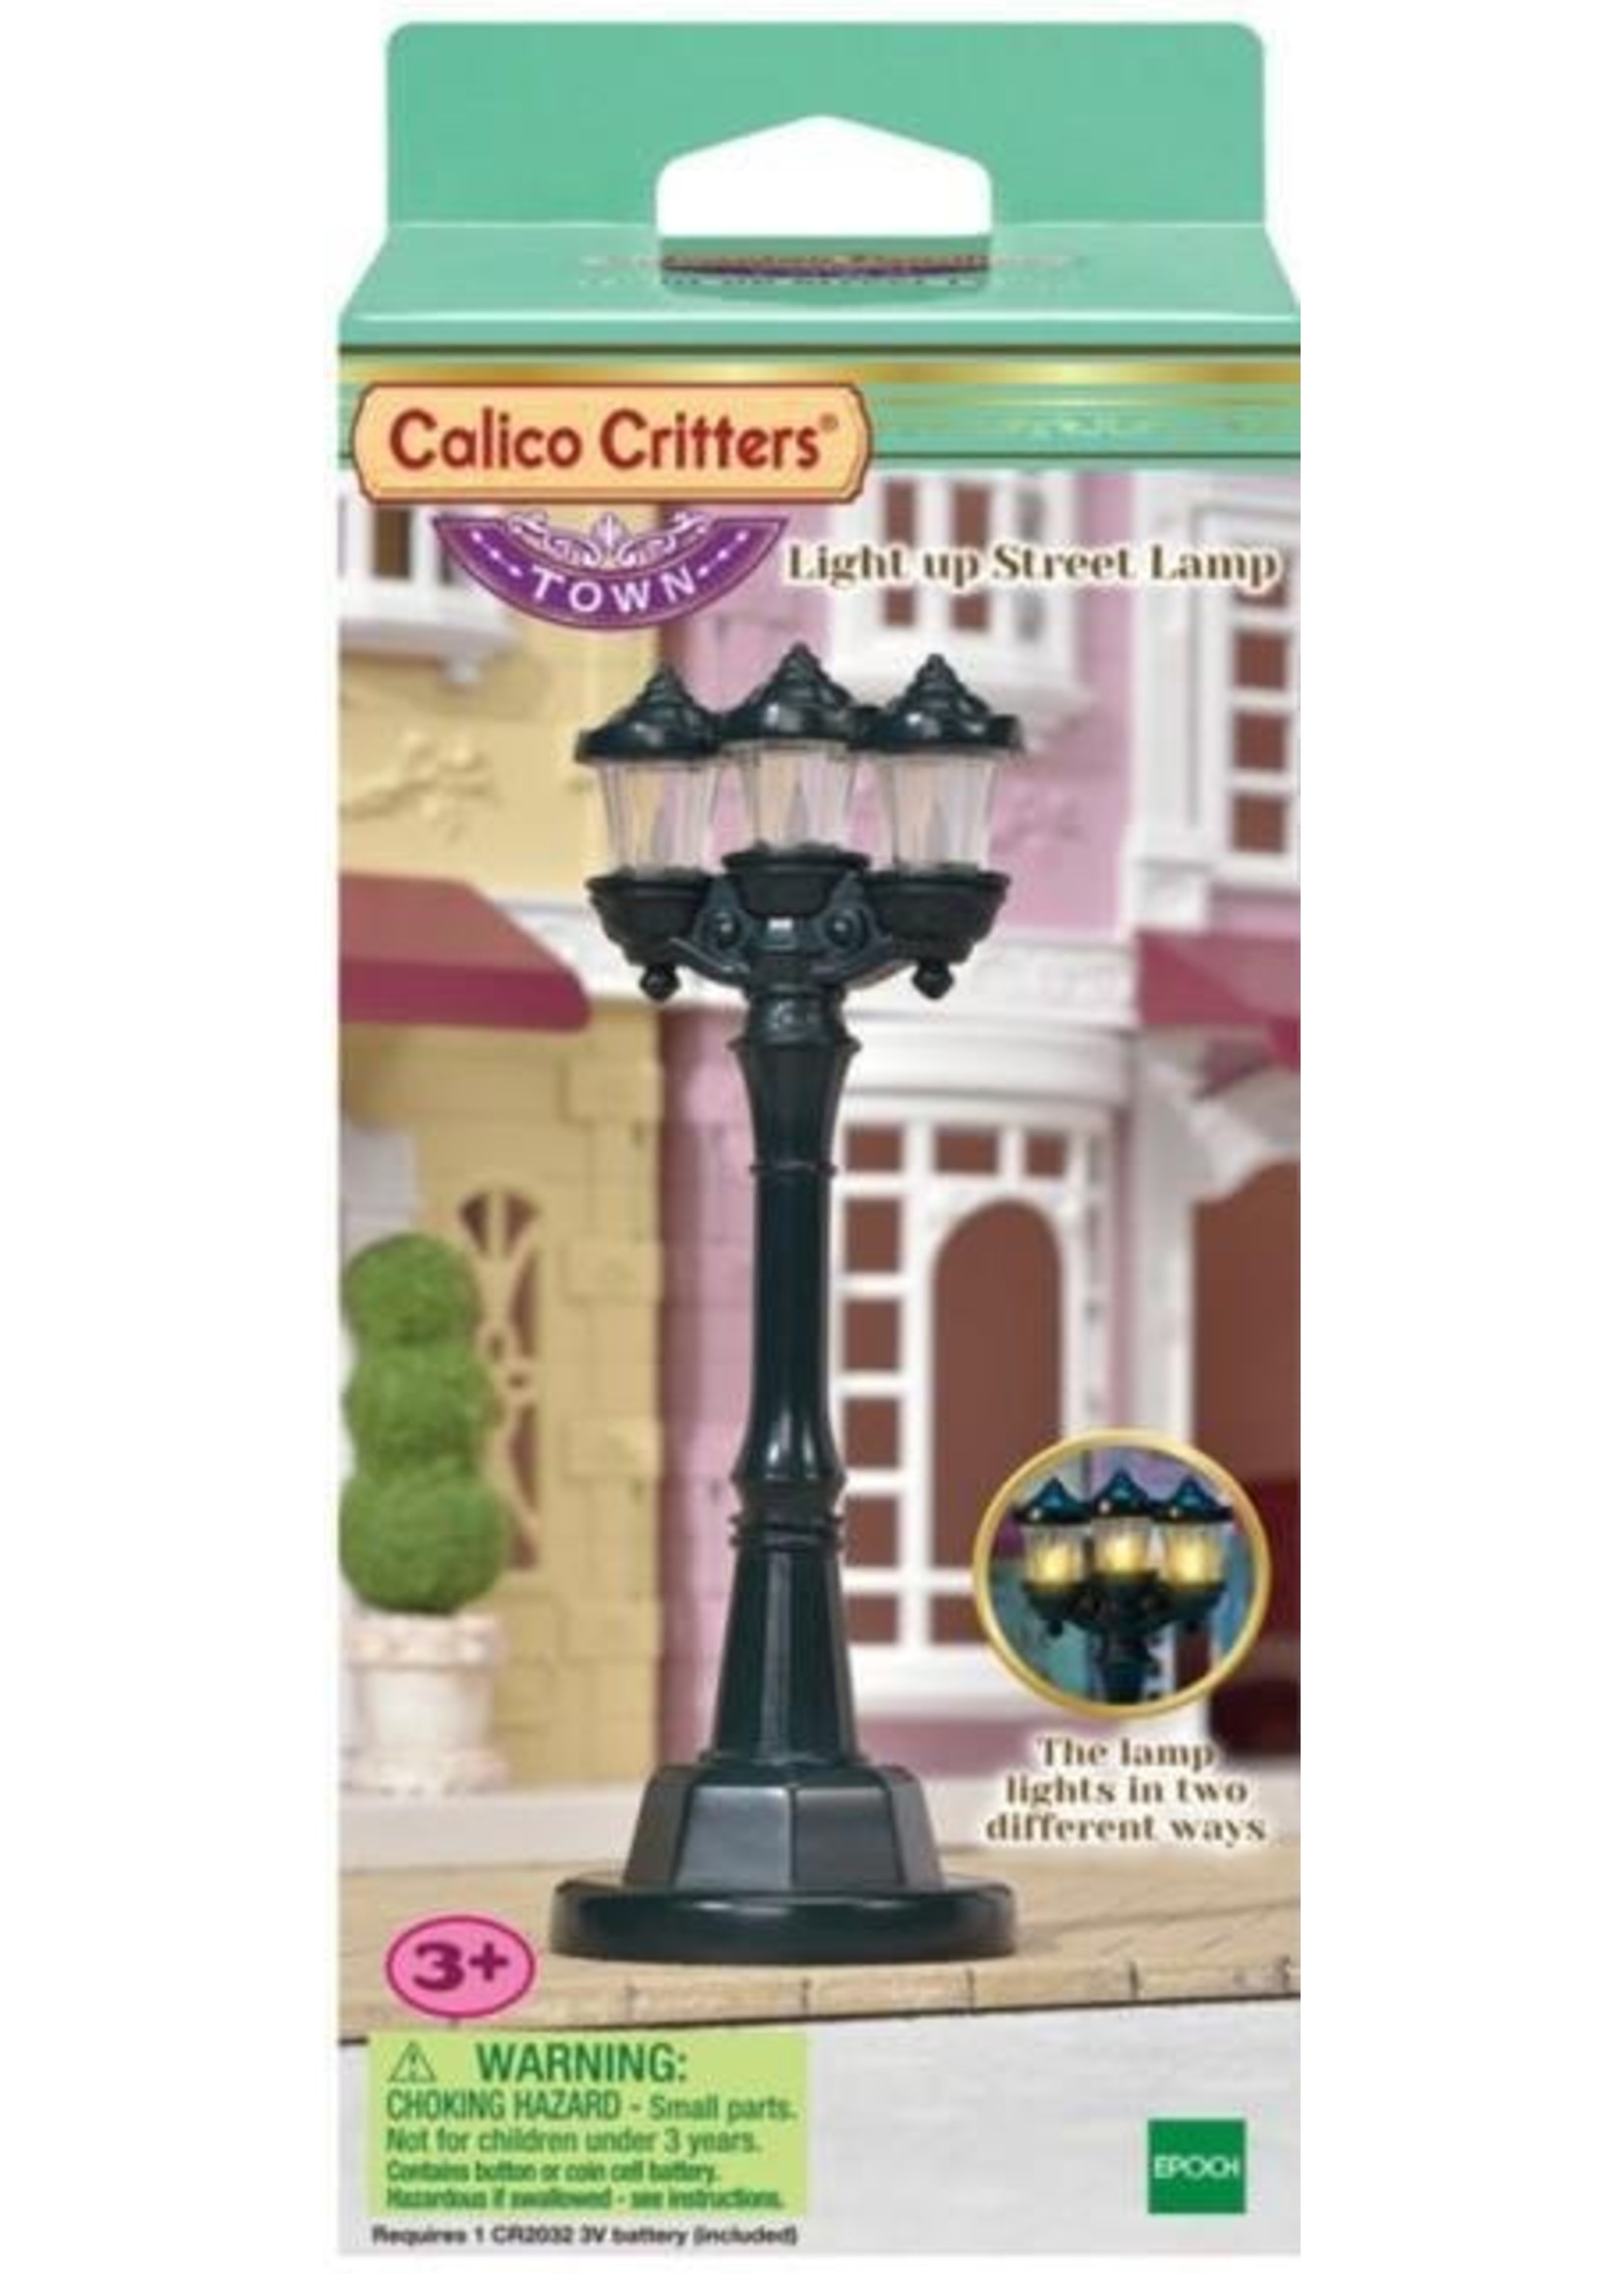 Calico Critters Light up Street Lamp